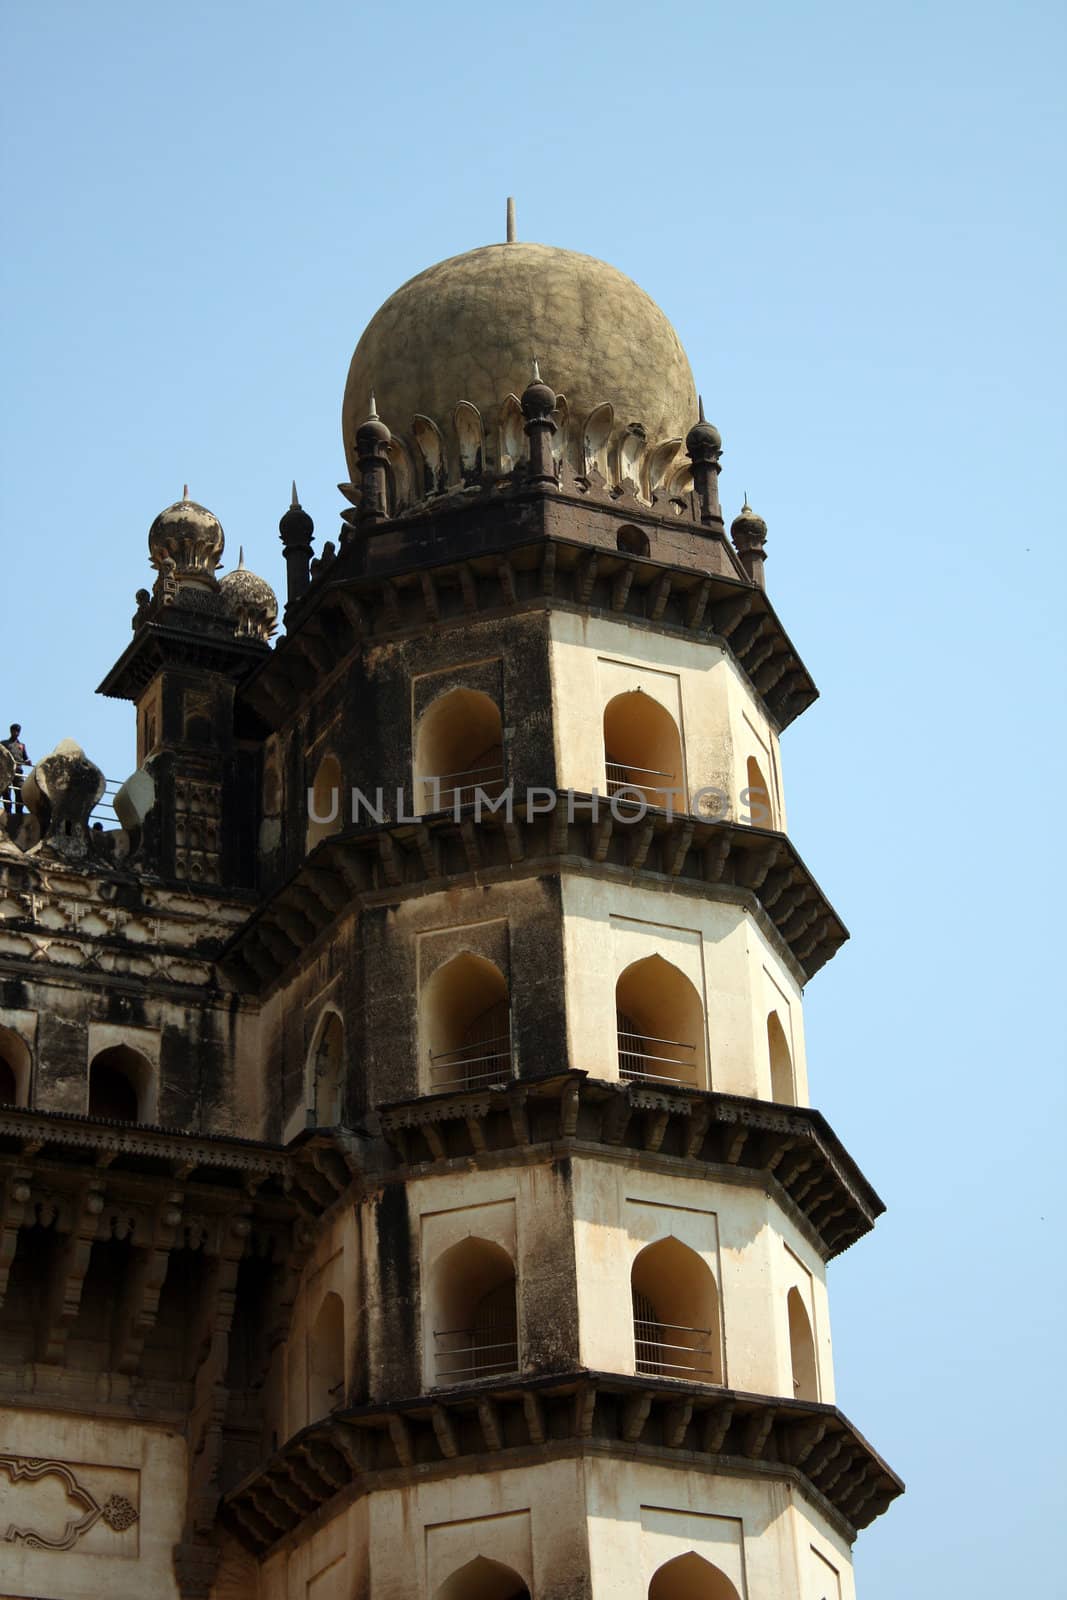 The tower of the ancient Bijapur Gol Gumaz Tower. The dome happens to be the worlds biggest ancient dome.